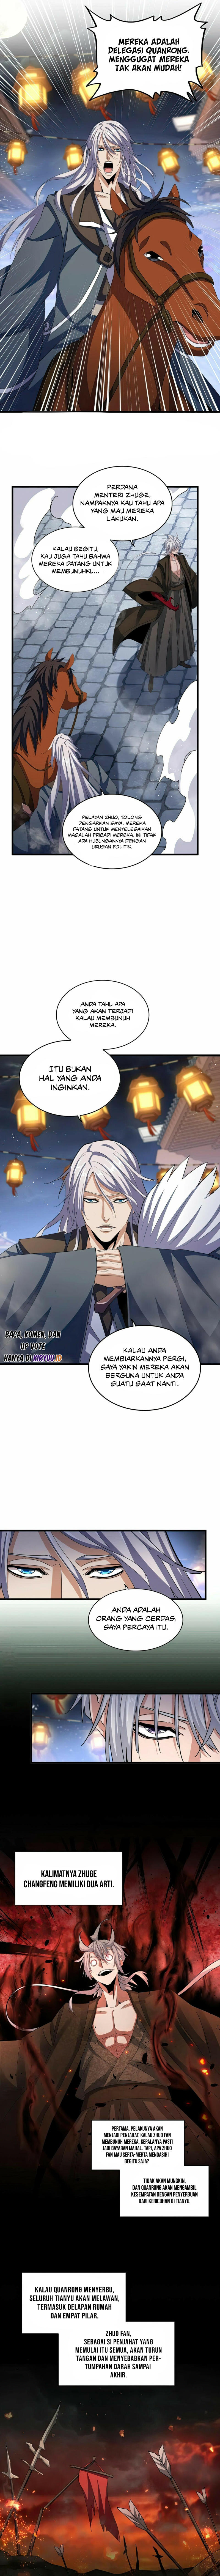 Magic Emperor Chapter 426 Image 2